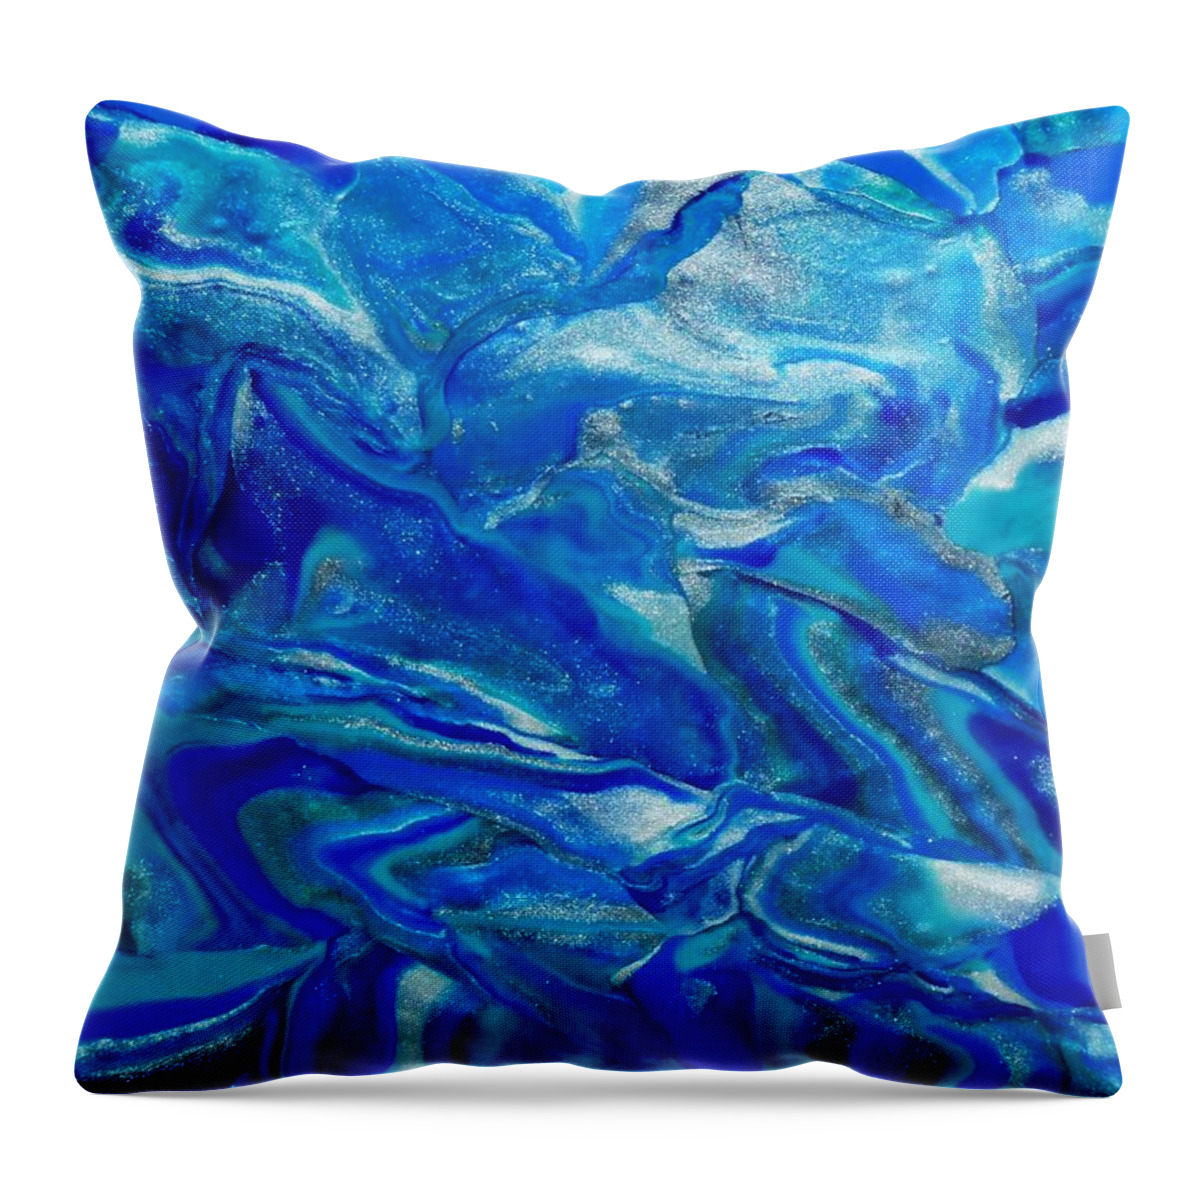 Abstract Throw Pillow featuring the mixed media Icy Blue by Deborah Stanley